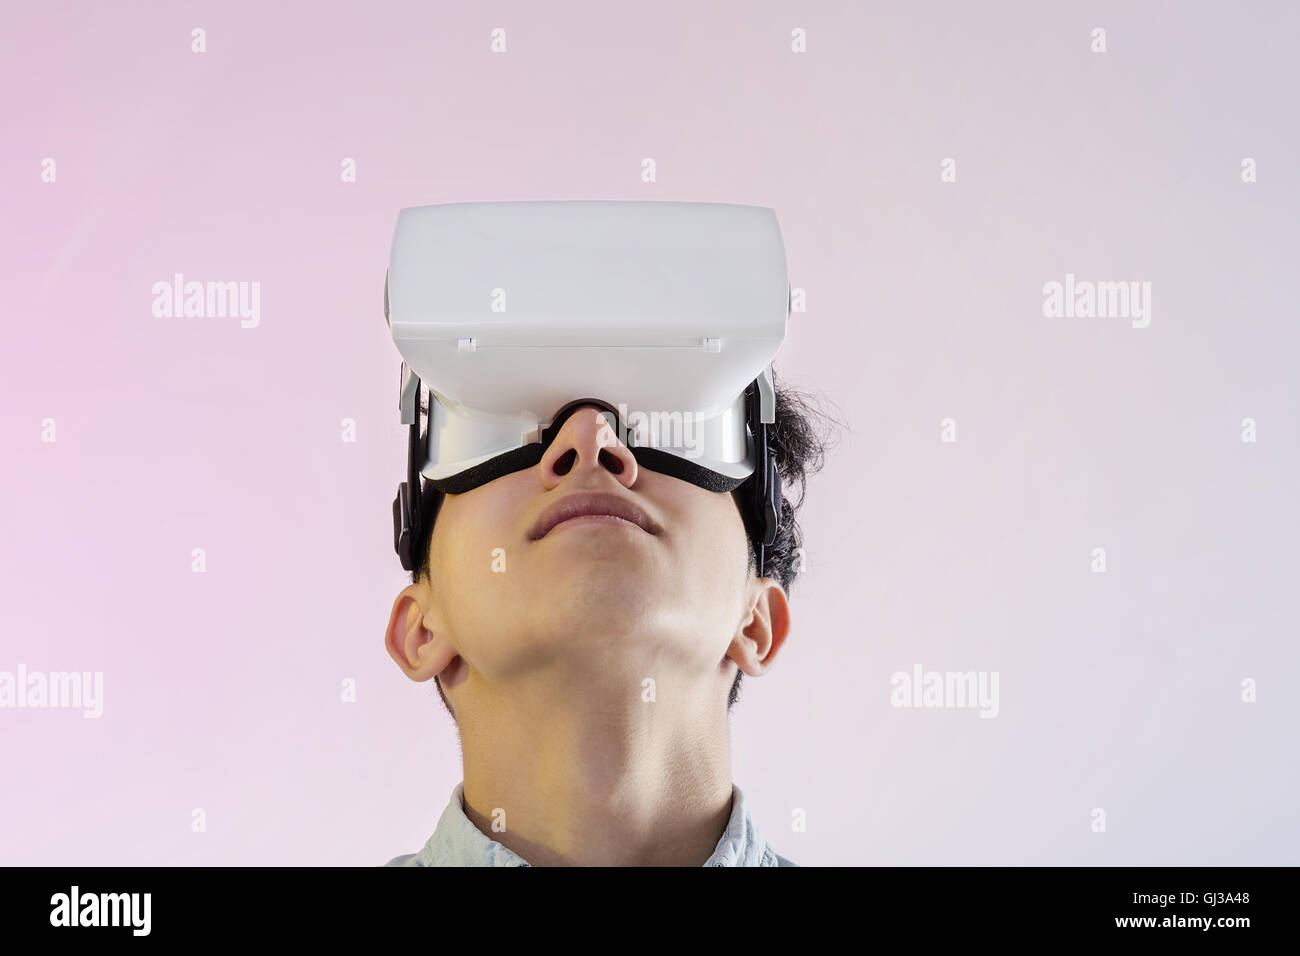 Young man wearing virtual reality headset looking up Stock Photo